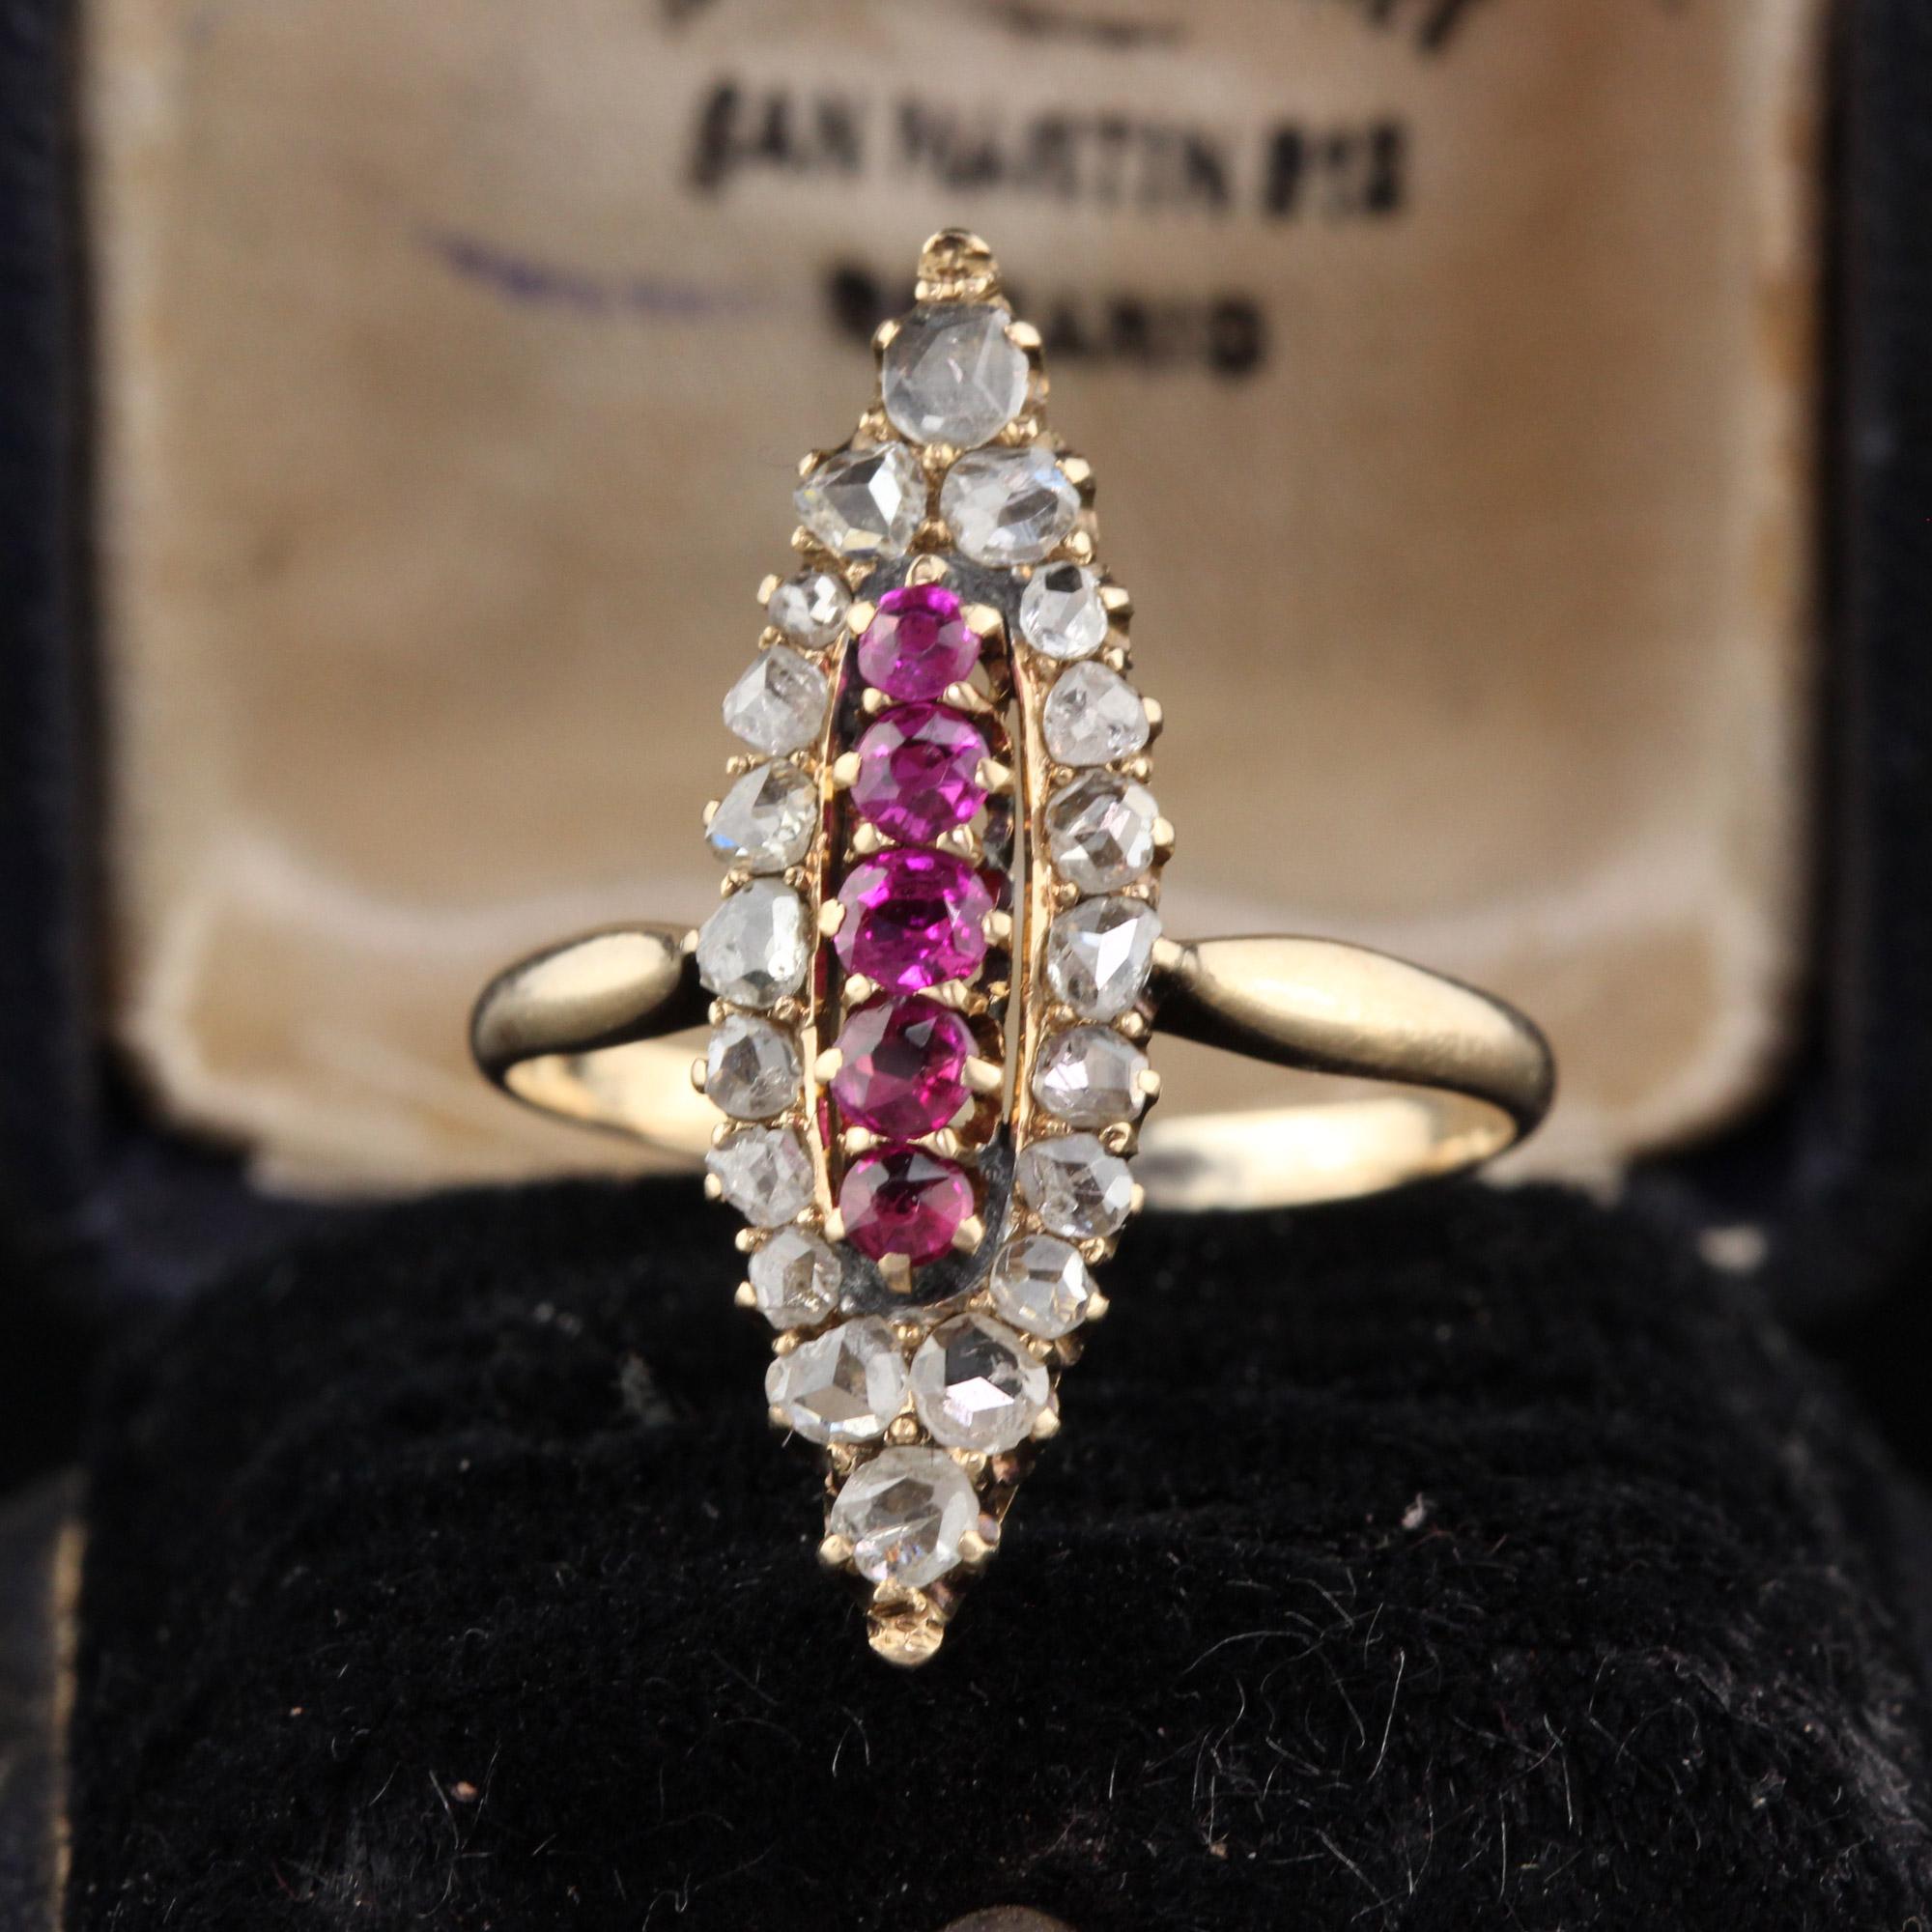 Antique Victorian 14K Yellow Gold, Rose Cut Diamond & Ruby Navette Ring

#R0043

Metal: 14K Yellow Gold

Weight: 2.9 Grams

Total Diamond Weight: Approximately 0.40 cts

Diamond Color: I

Diamond Clarity: SI2

Gemstone Weight: Approximately 0.30 cts